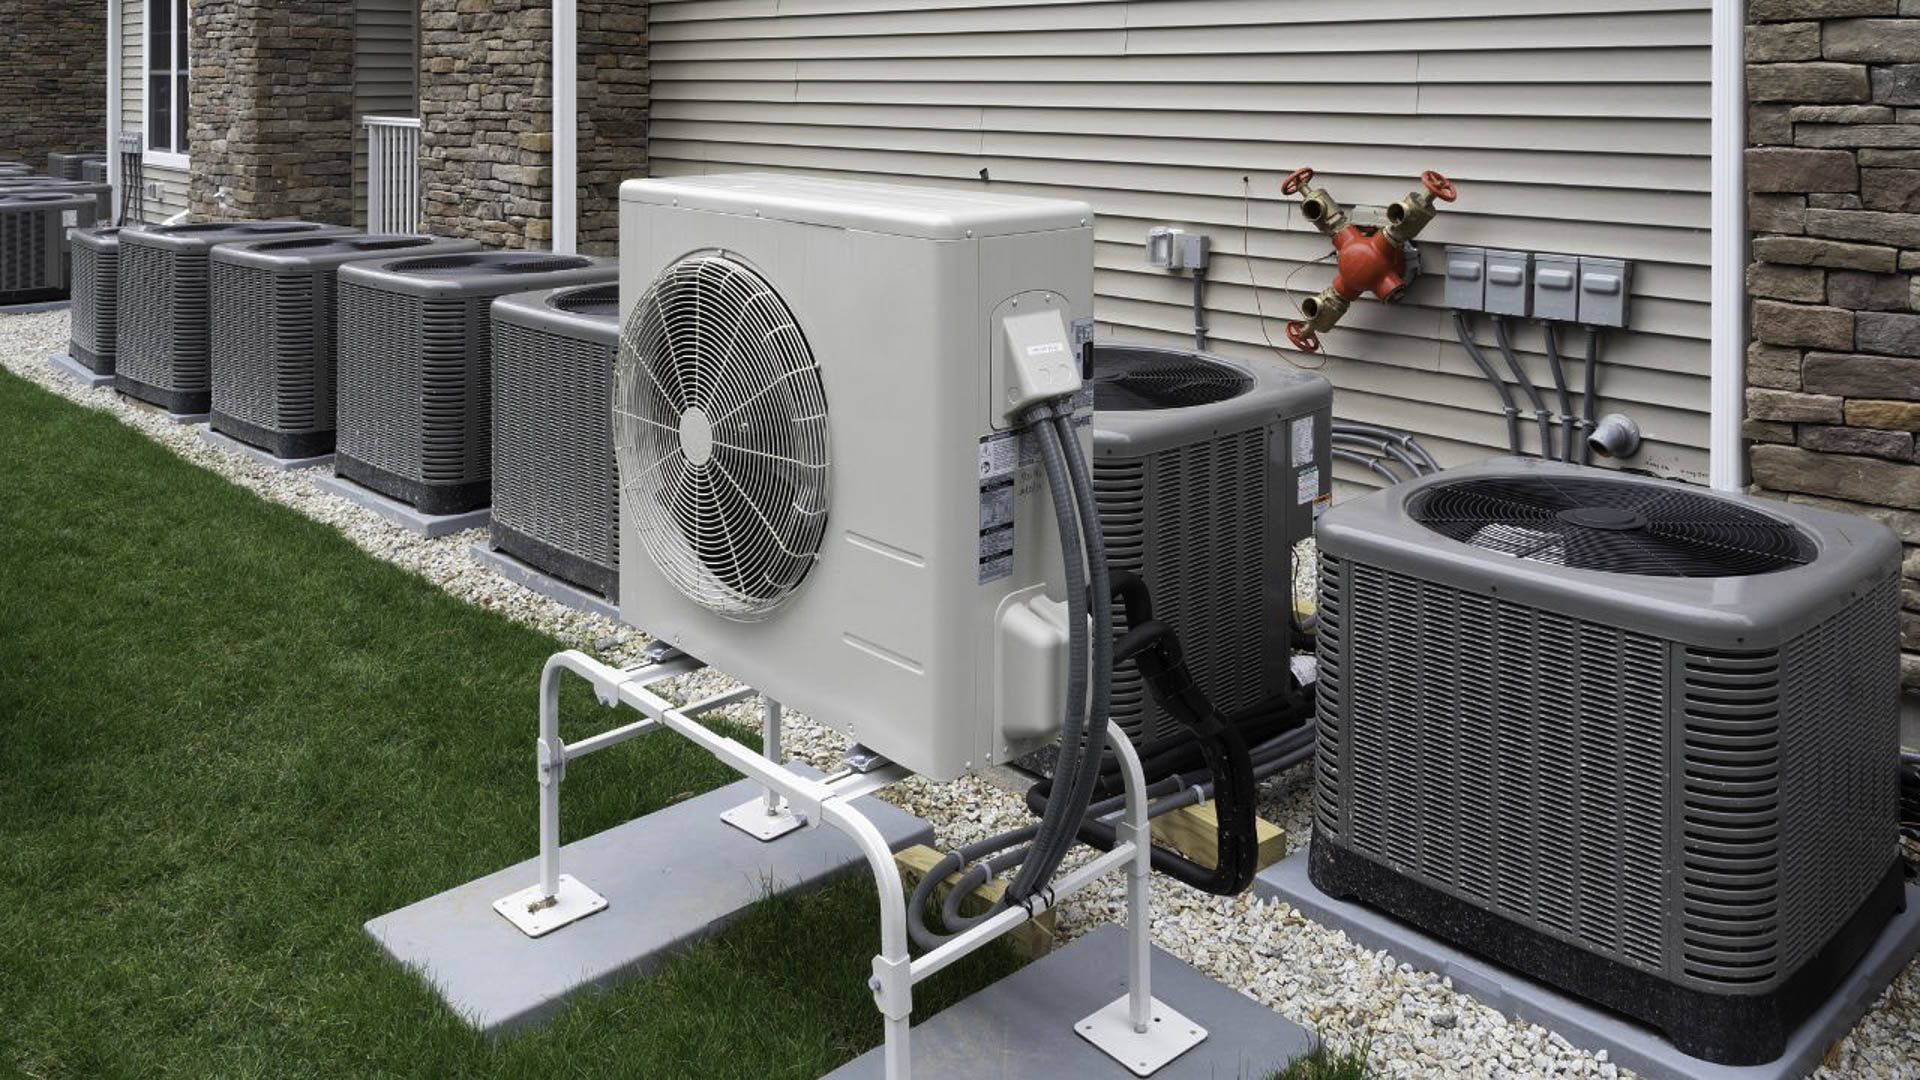 How to Find the Right Company for AC Repair in West Jordan